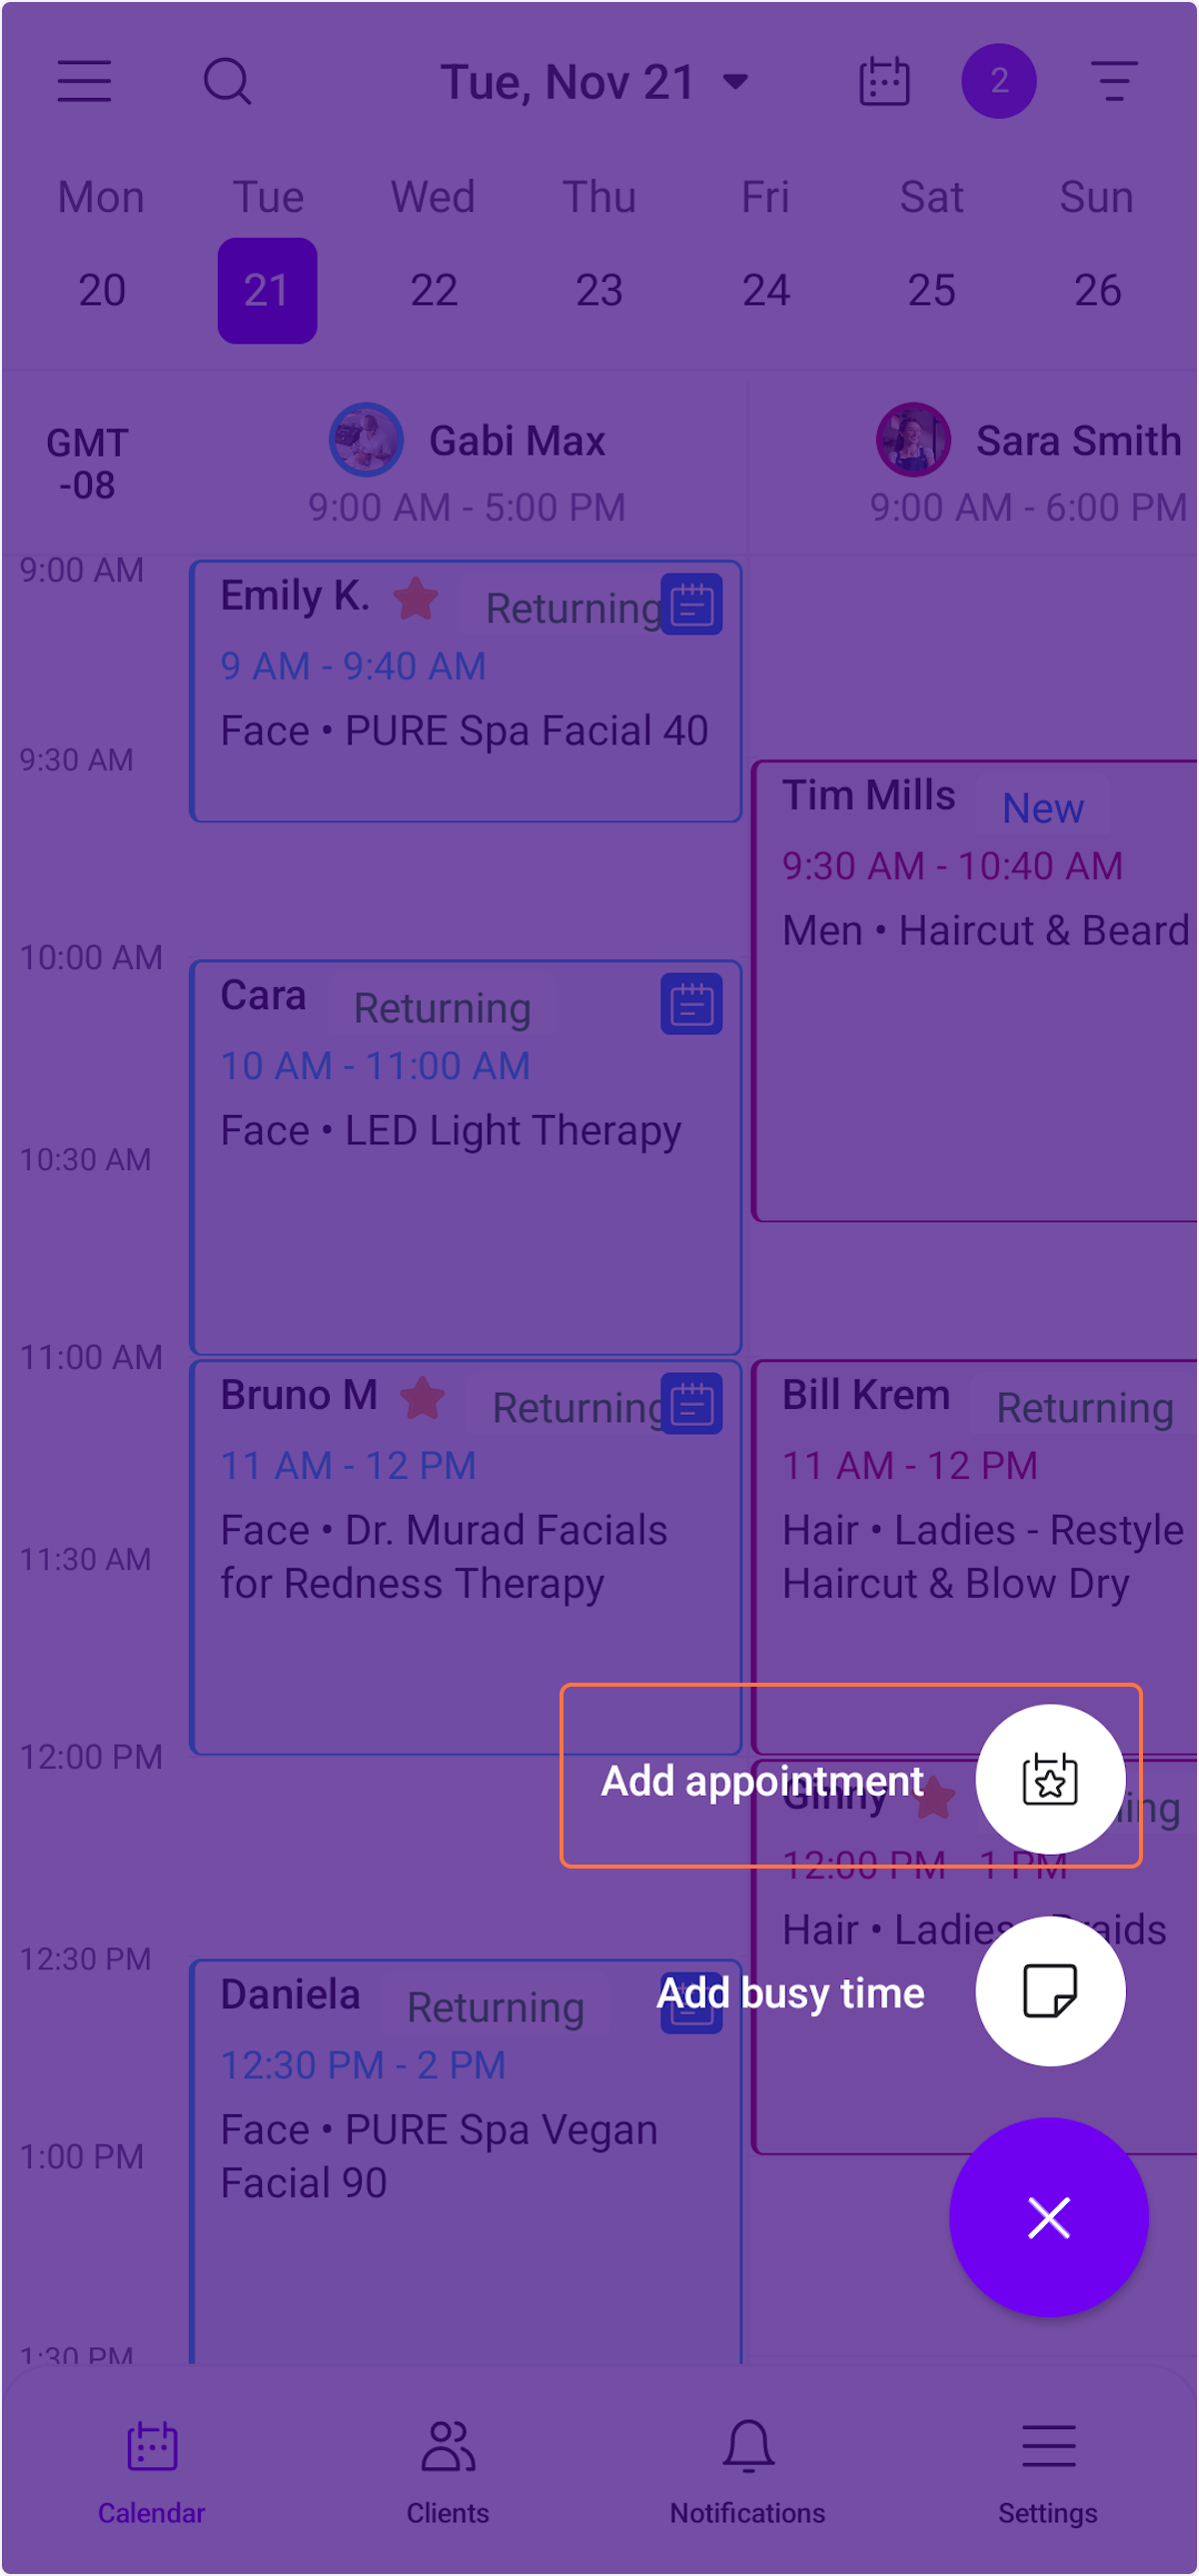 Tap the "Add appointment" button.